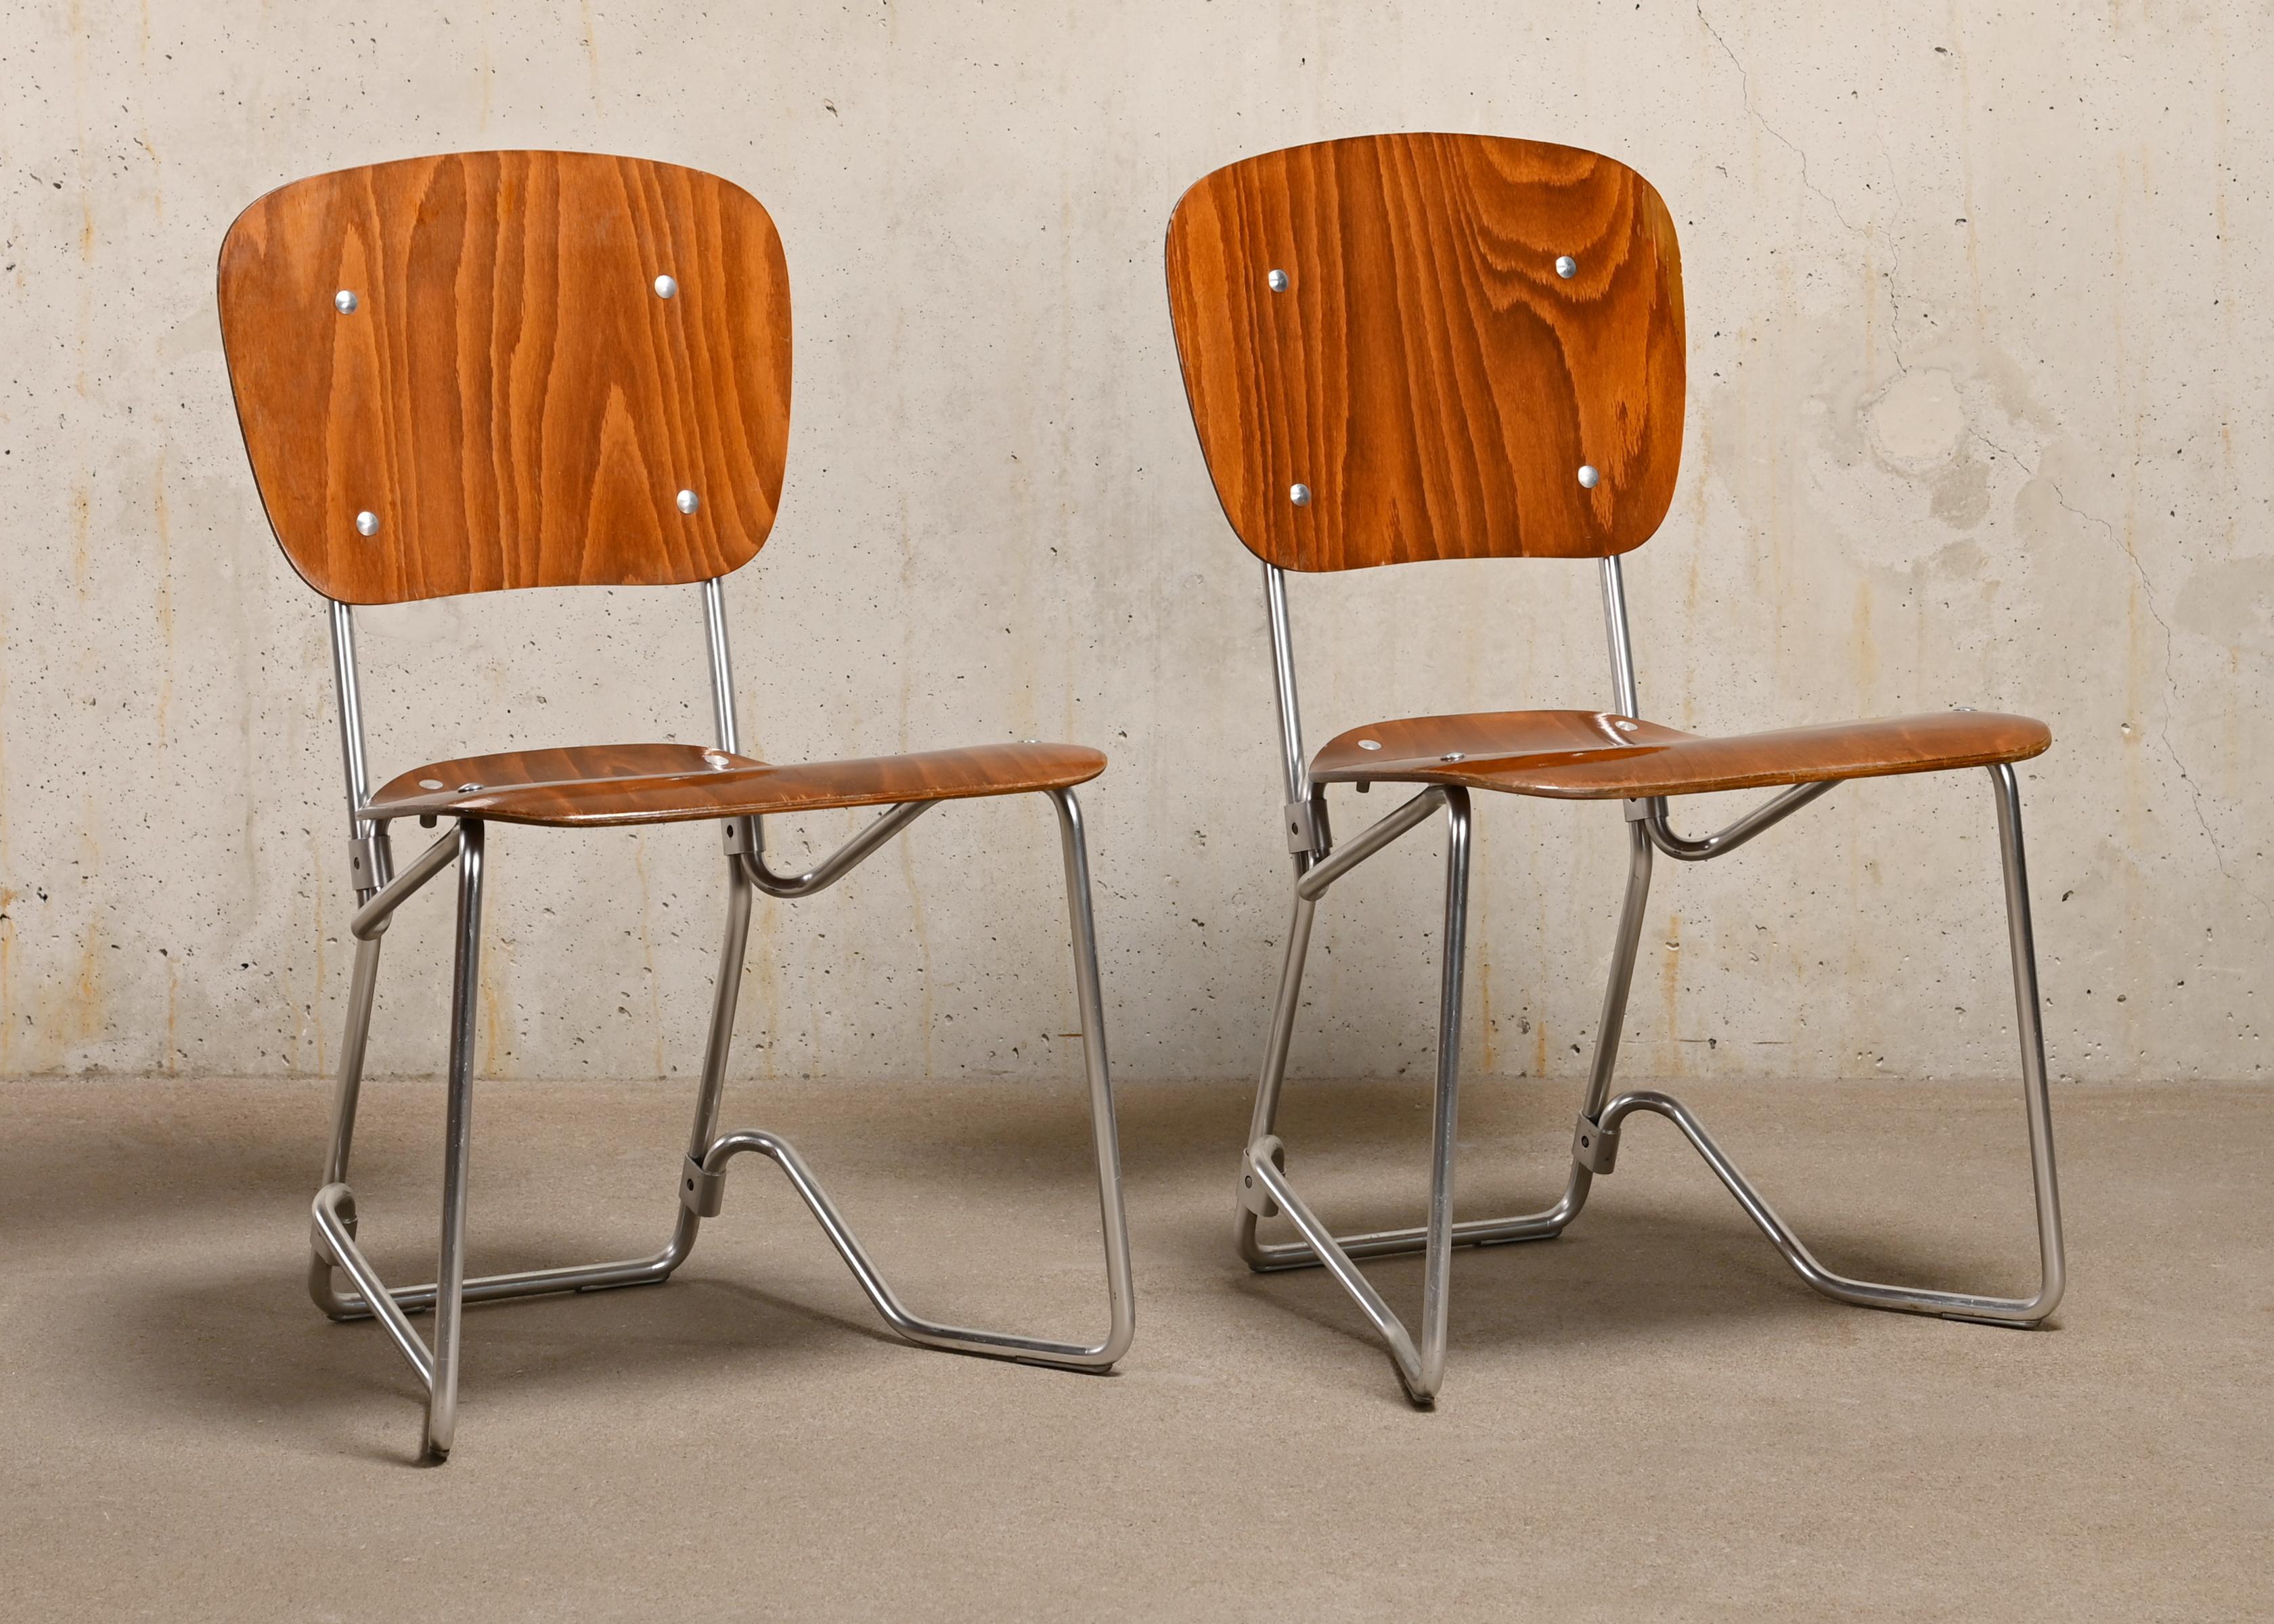 Molded Armin Wirth Aluflex Folding Chairs in stained plywood for Philipp Zieringer KG